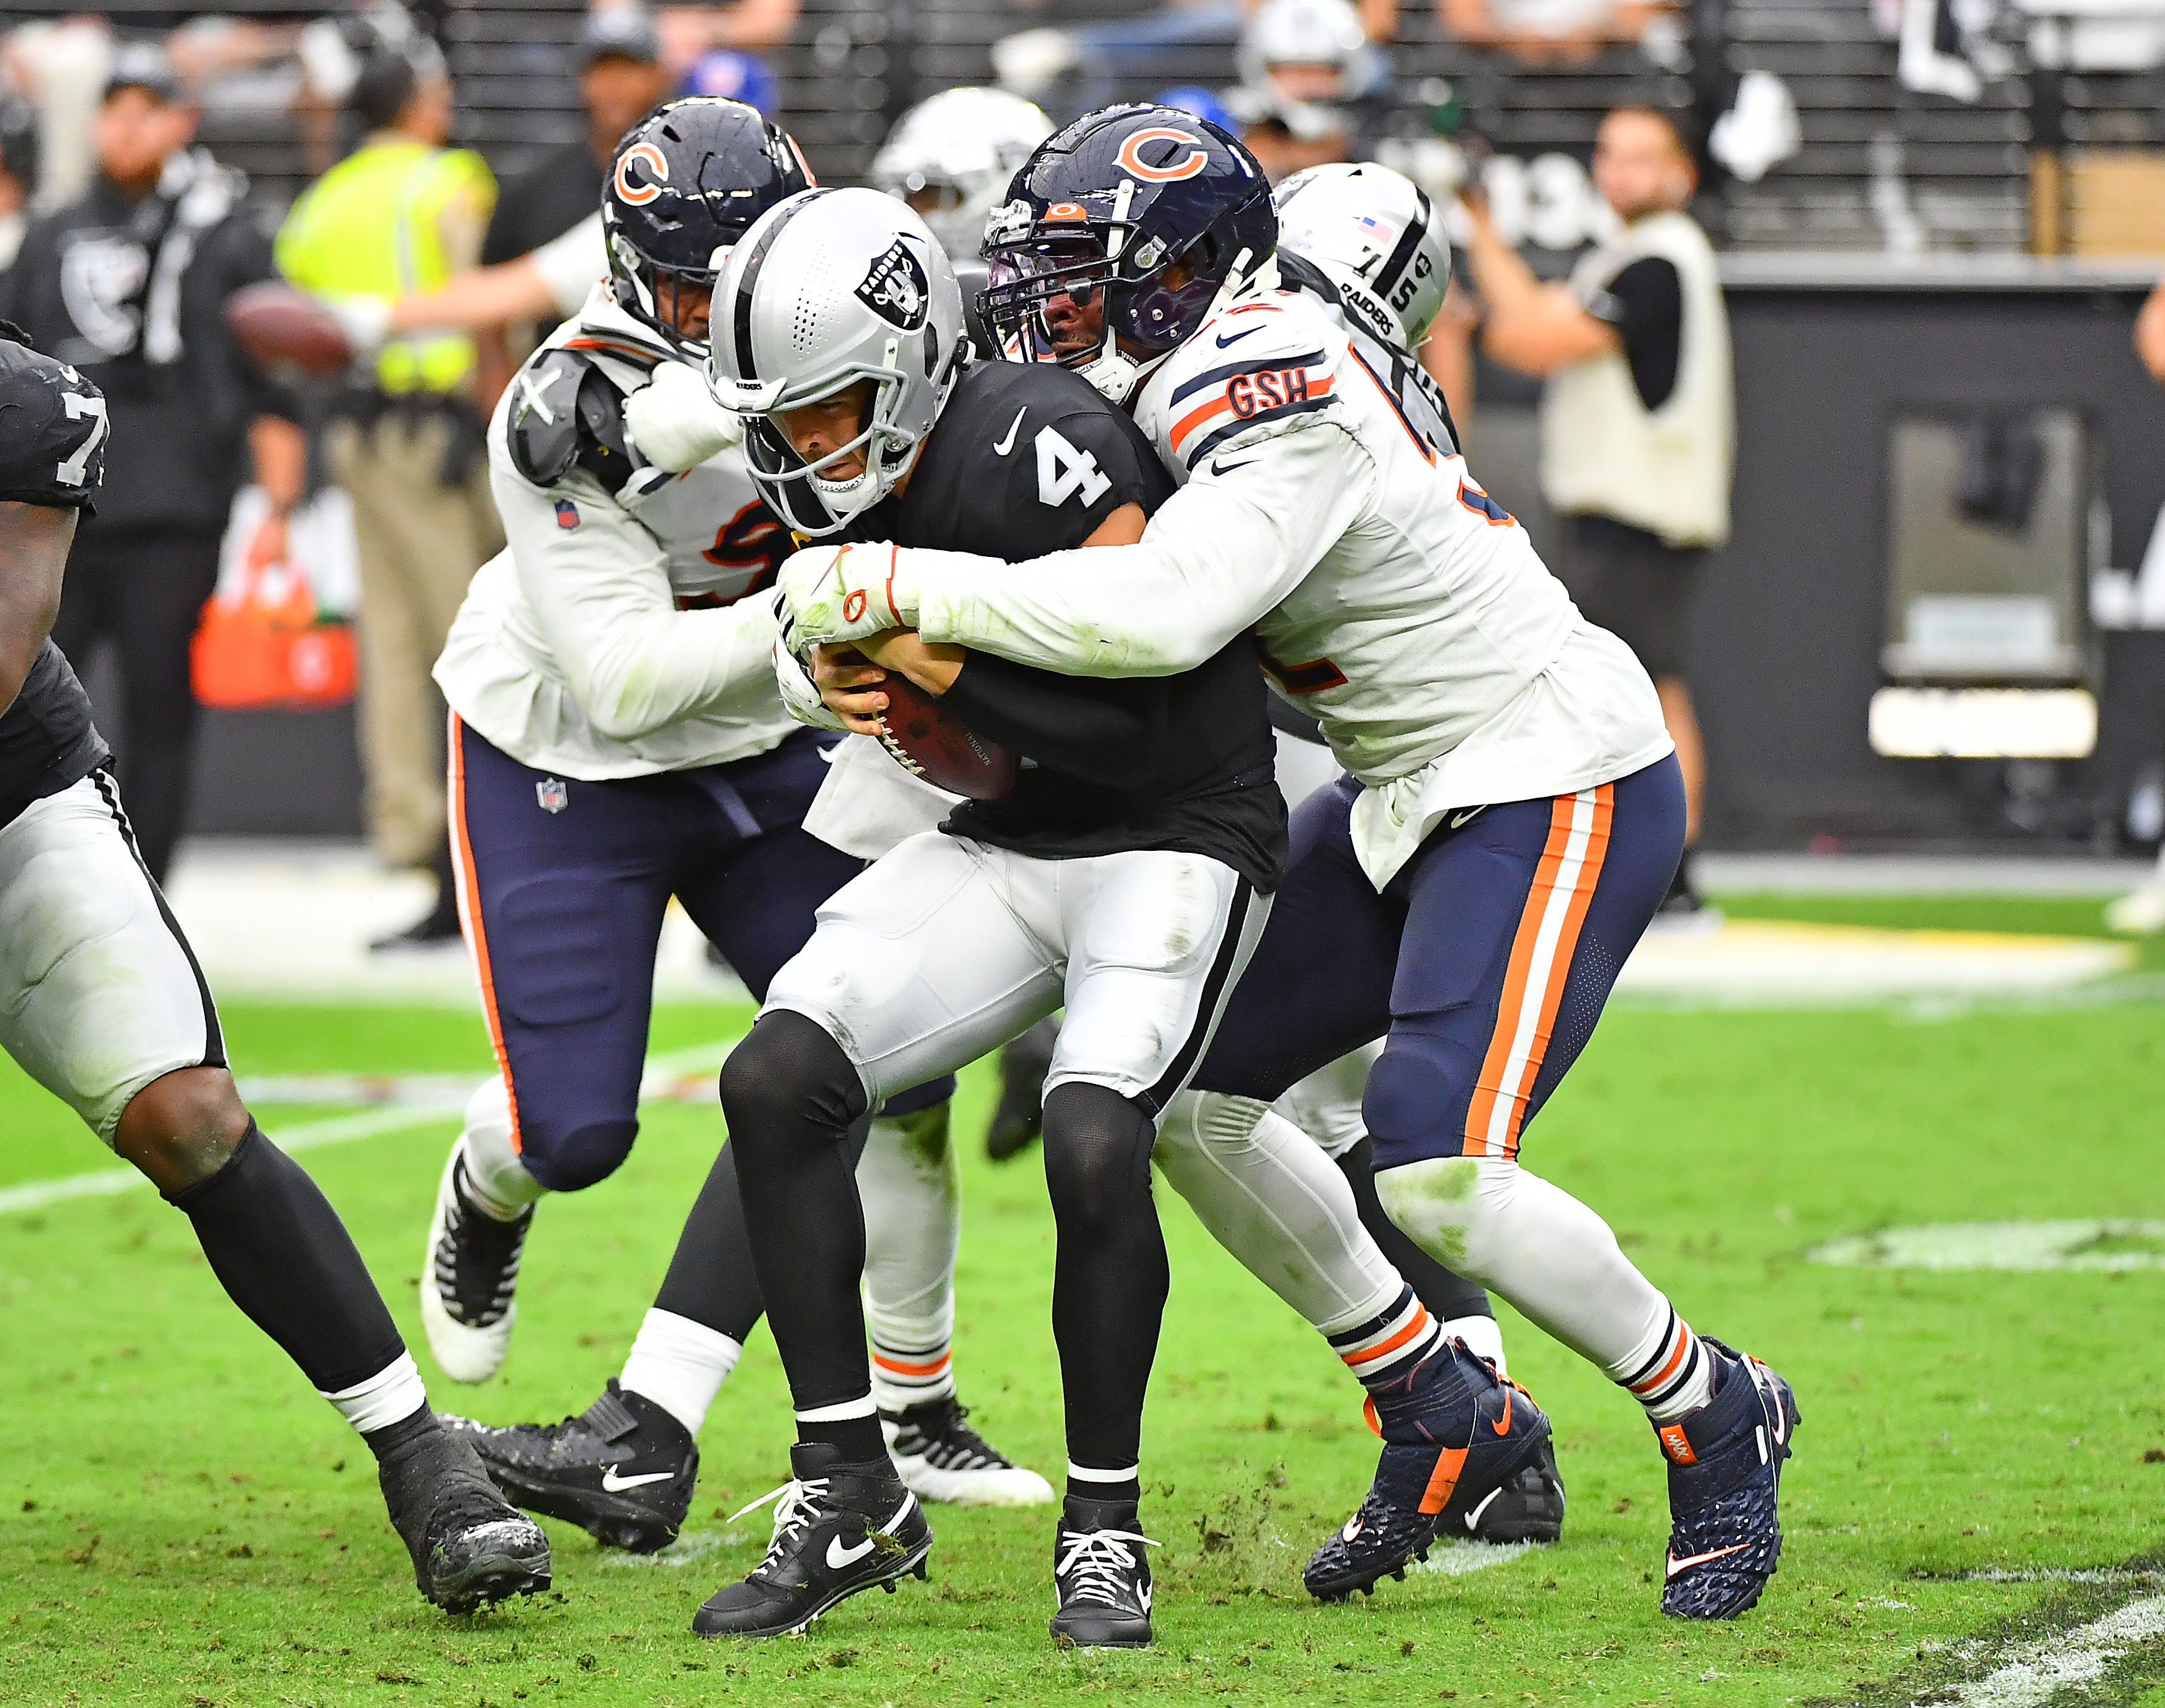 Oct 10, 2021; Paradise, Nevada, USA; Las Vegas Raiders quarterback Derek Carr (4) is sacked by Chicago Bears outside linebacker Khalil Mack (52) during the first half of a game at Allegiant Stadium. Mandatory Credit: Stephen R. Sylvanie-USA TODAY Sports